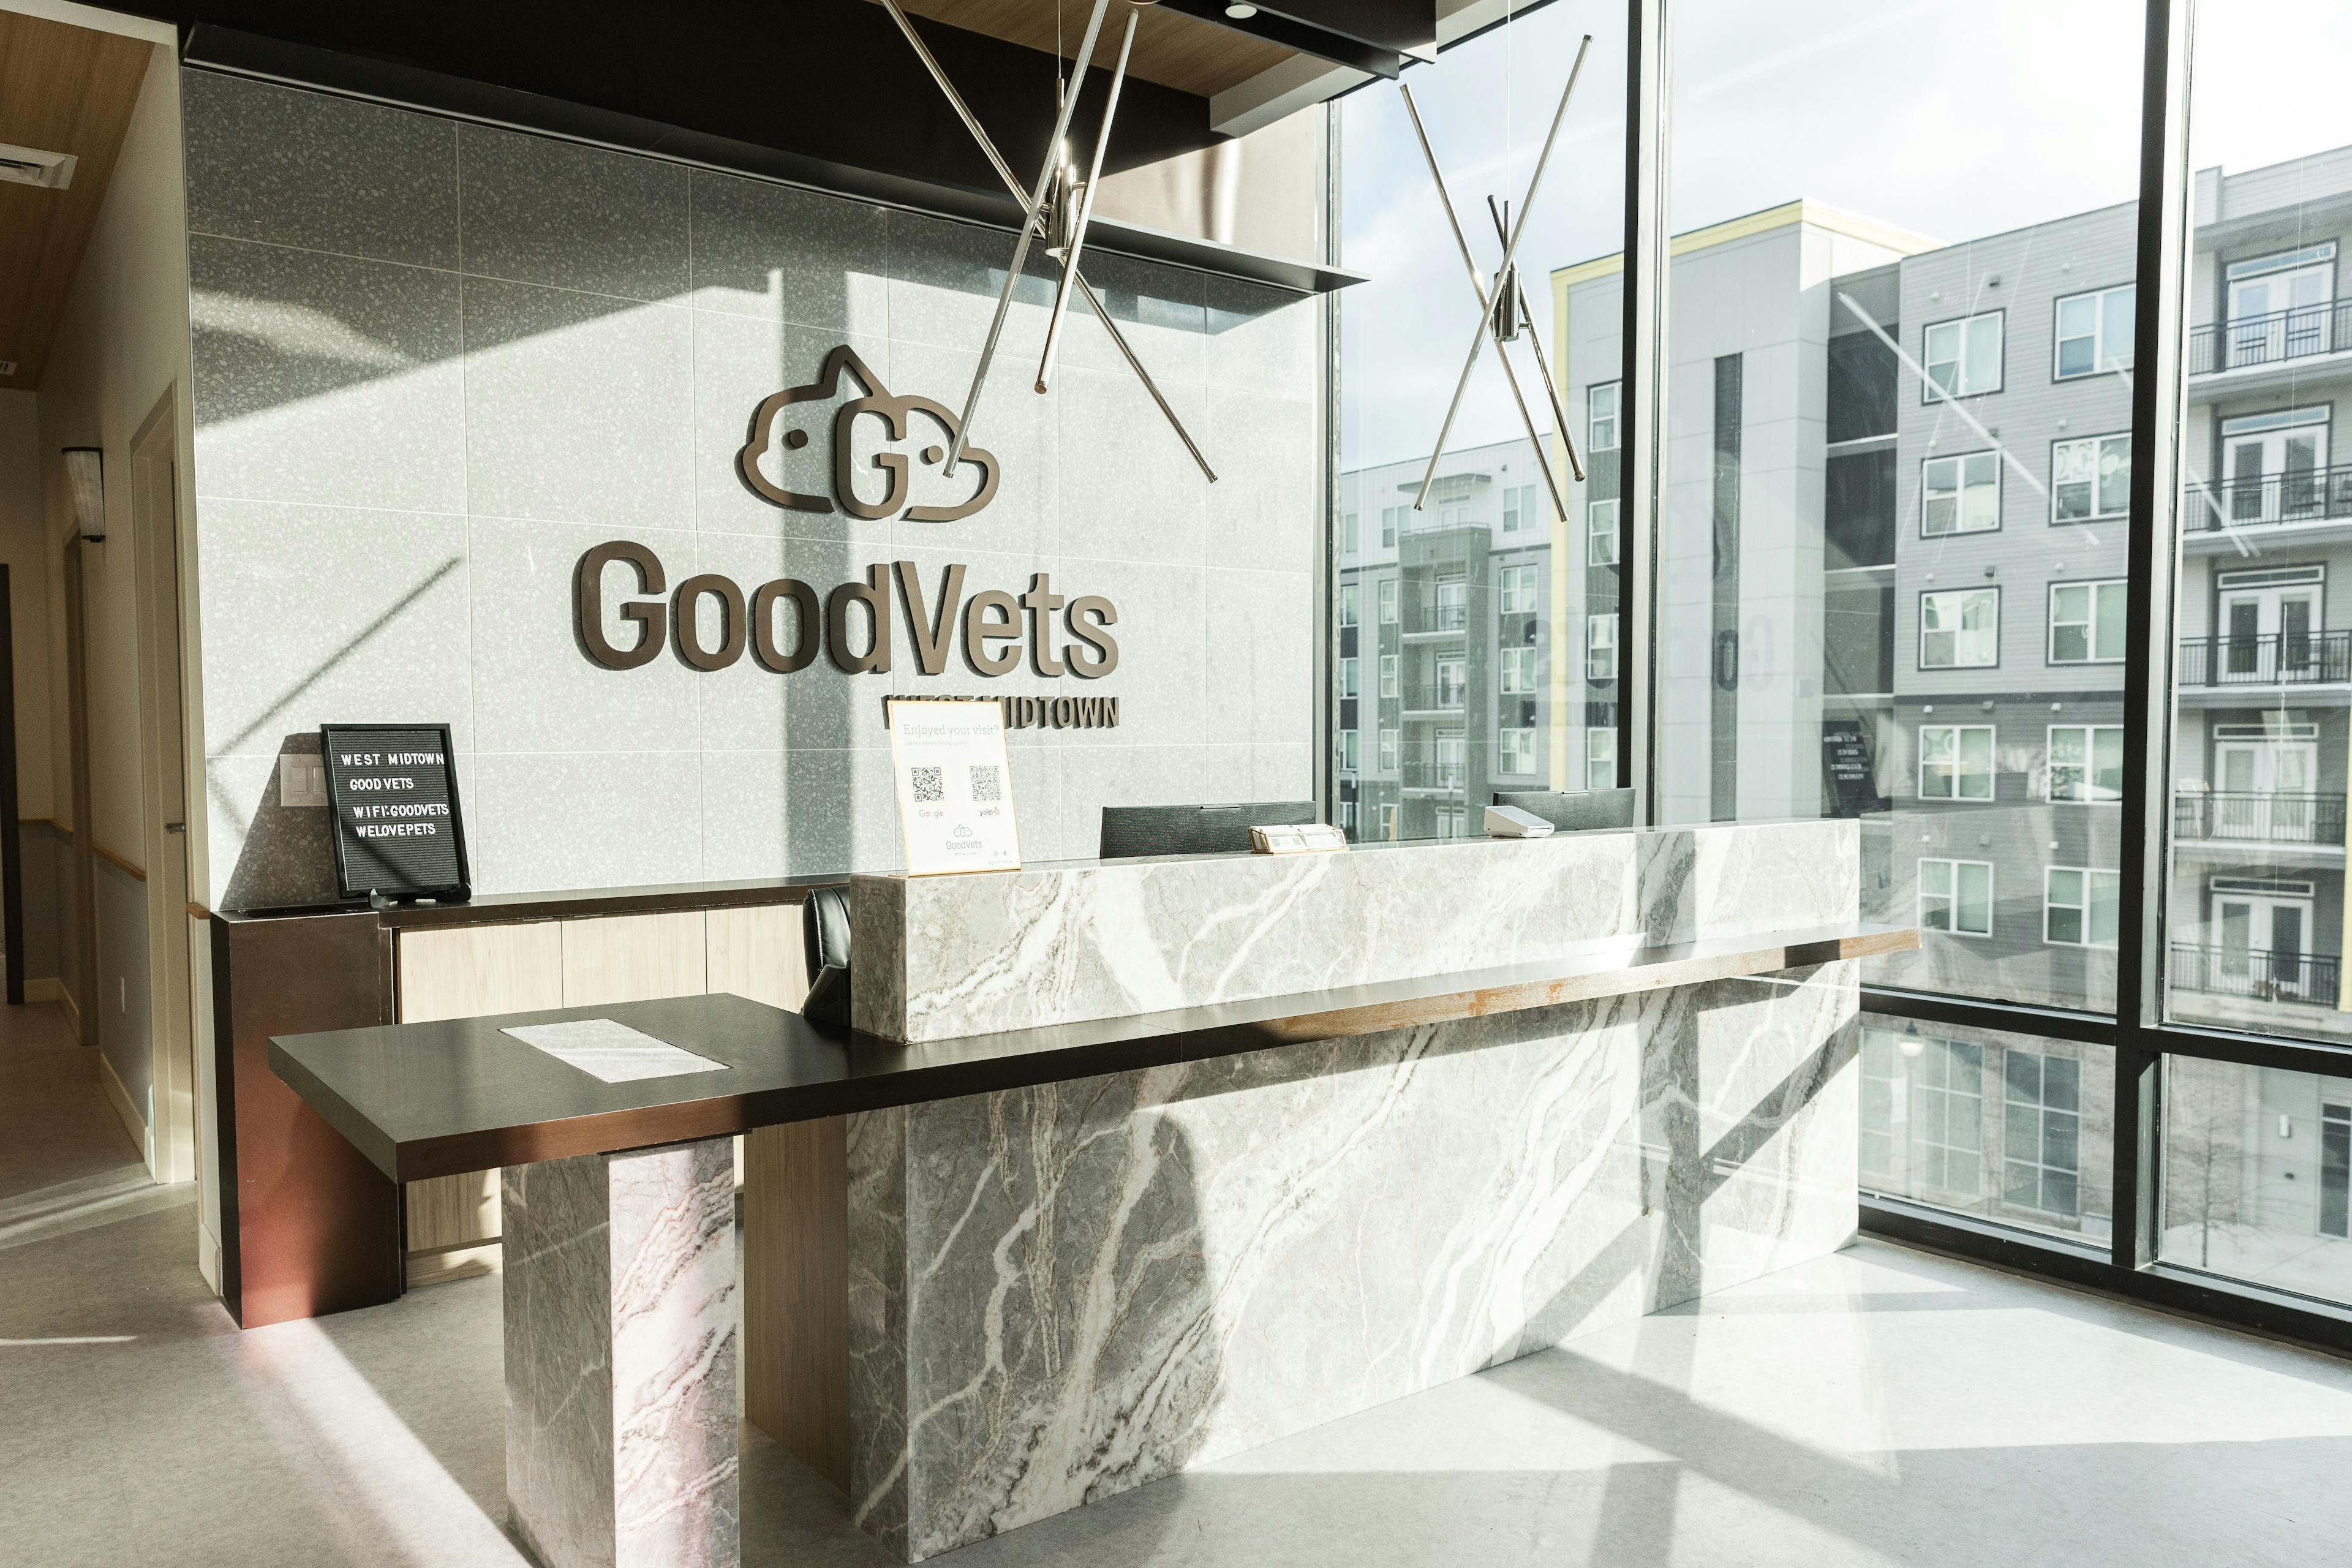 GoodVets West Midtown. (Photos courtesy of GoodVets)